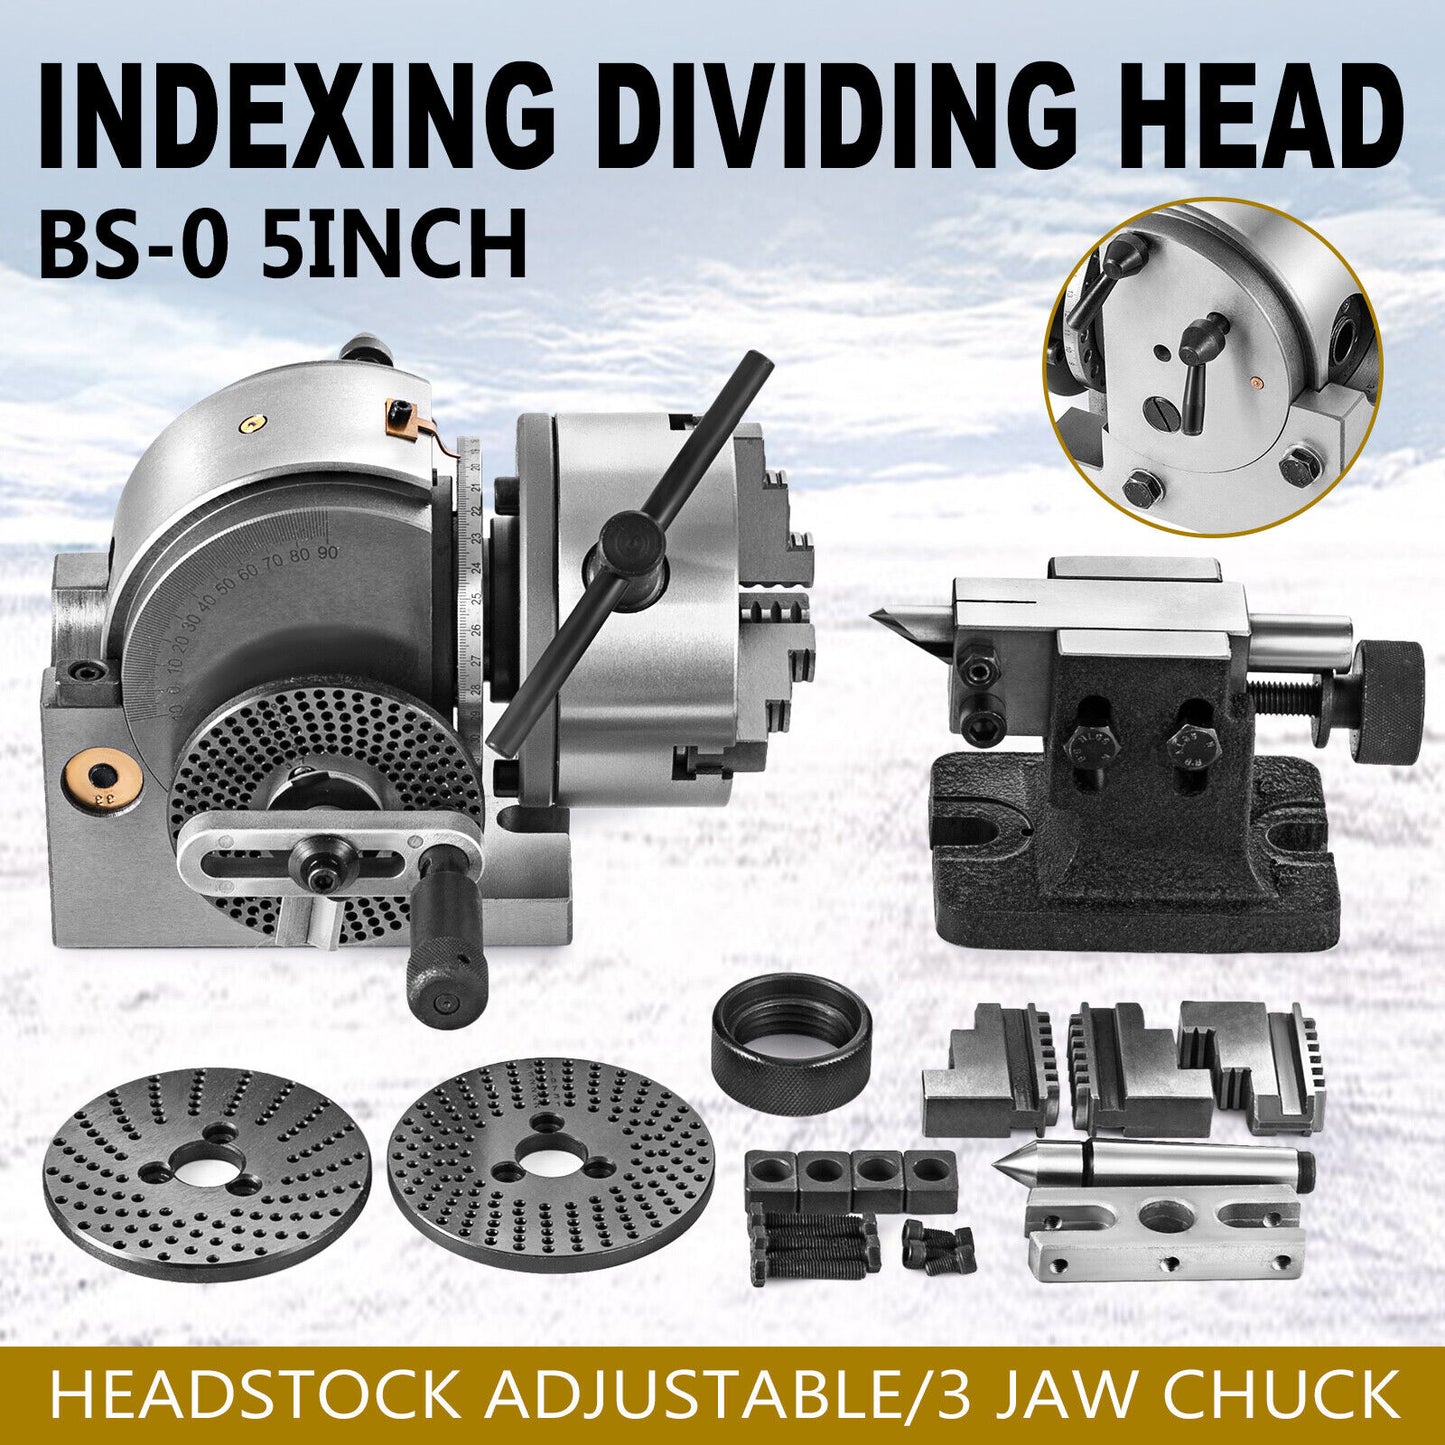 BS-0 Semi 5" Indexing Spiral Dividing Head 3-Jaw Chuck Tailstock For CNC Milling